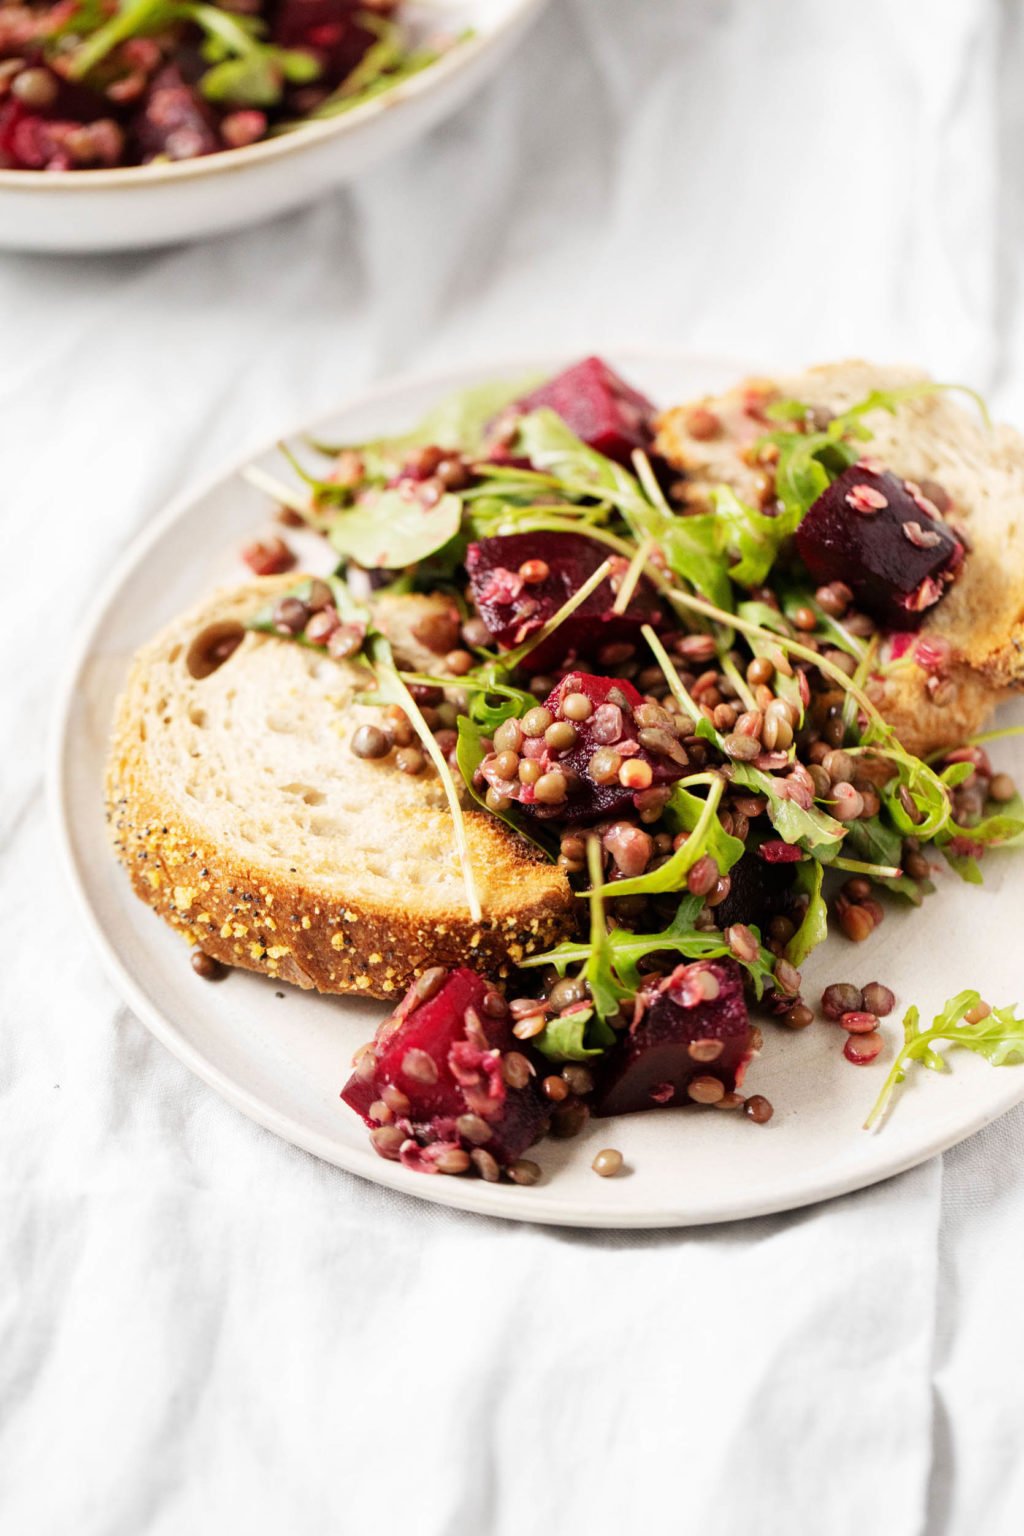 Leftovers of a salad with arugula, beets and lentils are piled over a slice of toast. 